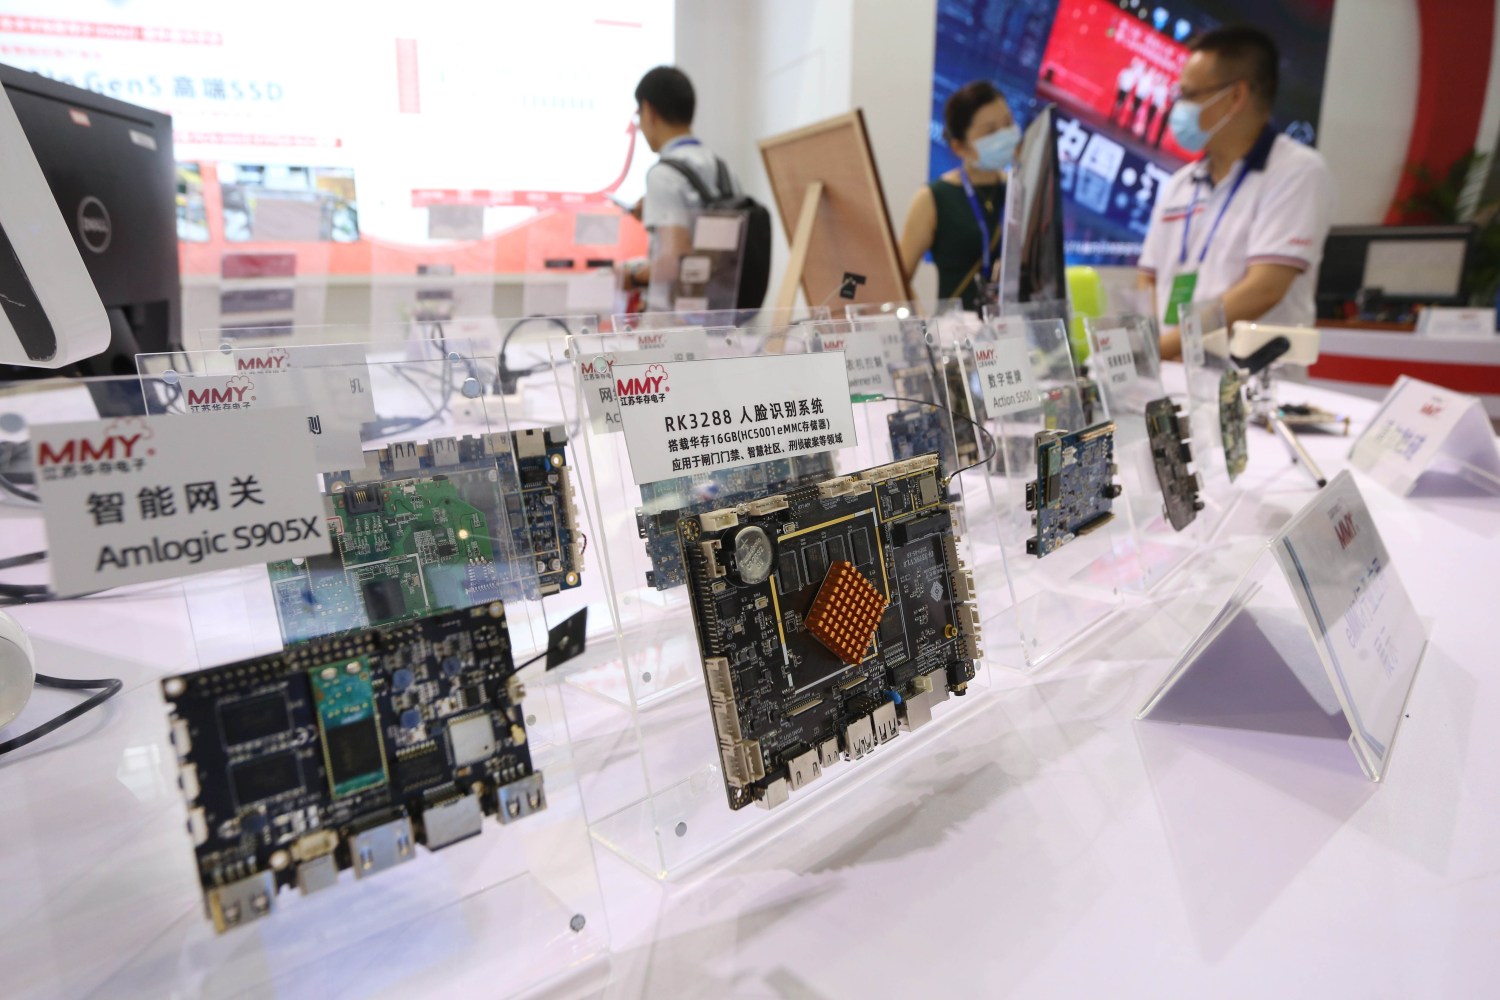 Semiconductor products are displaeyd on a white table at a conference in eastern China.